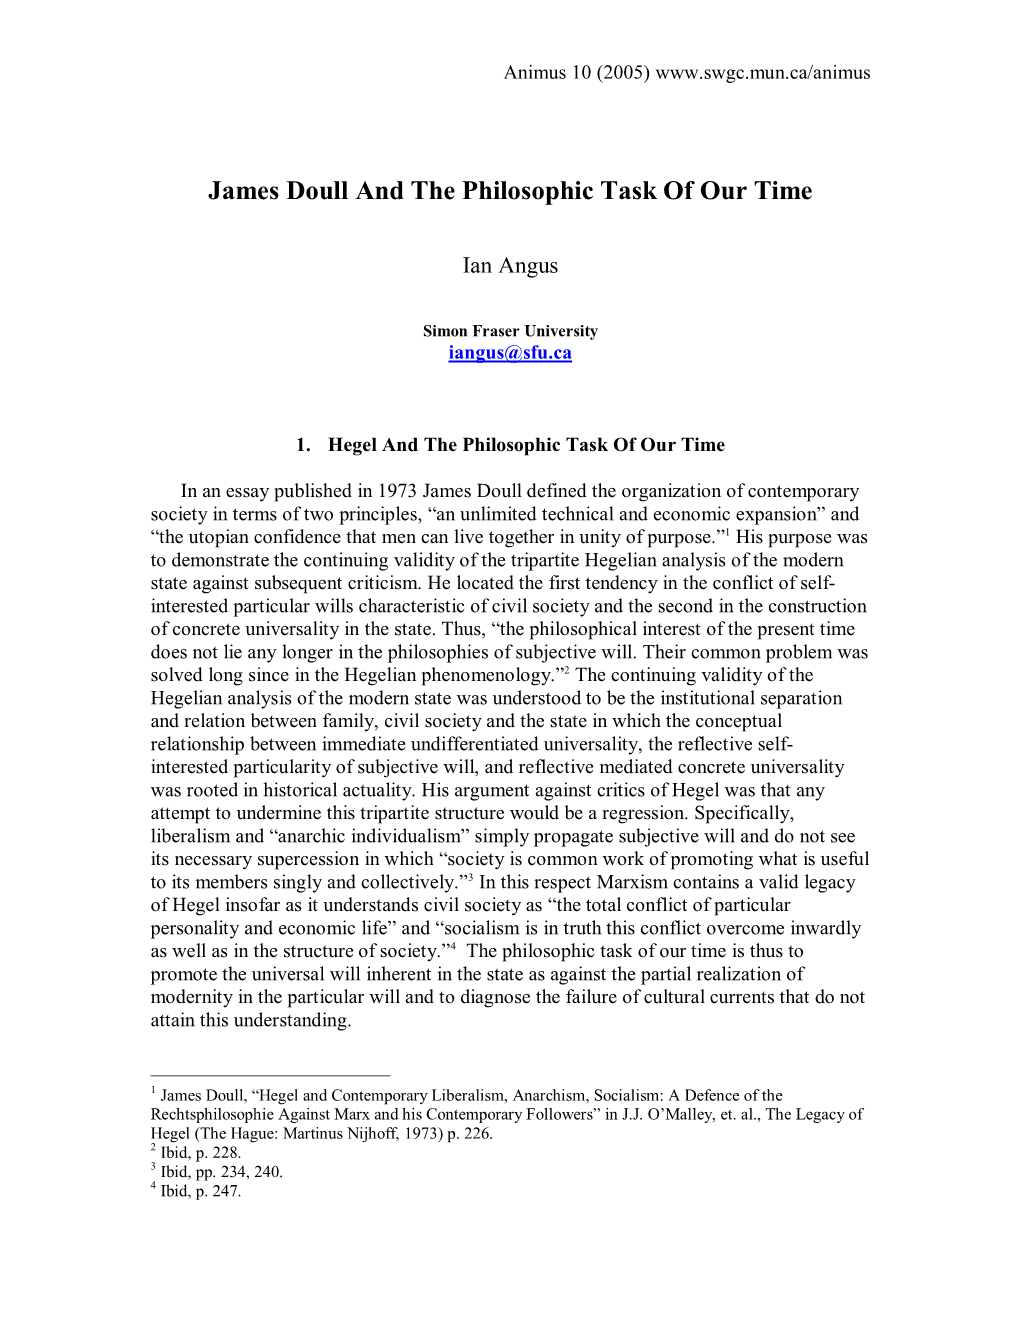 James Doull and the Philosophic Task of Our Time